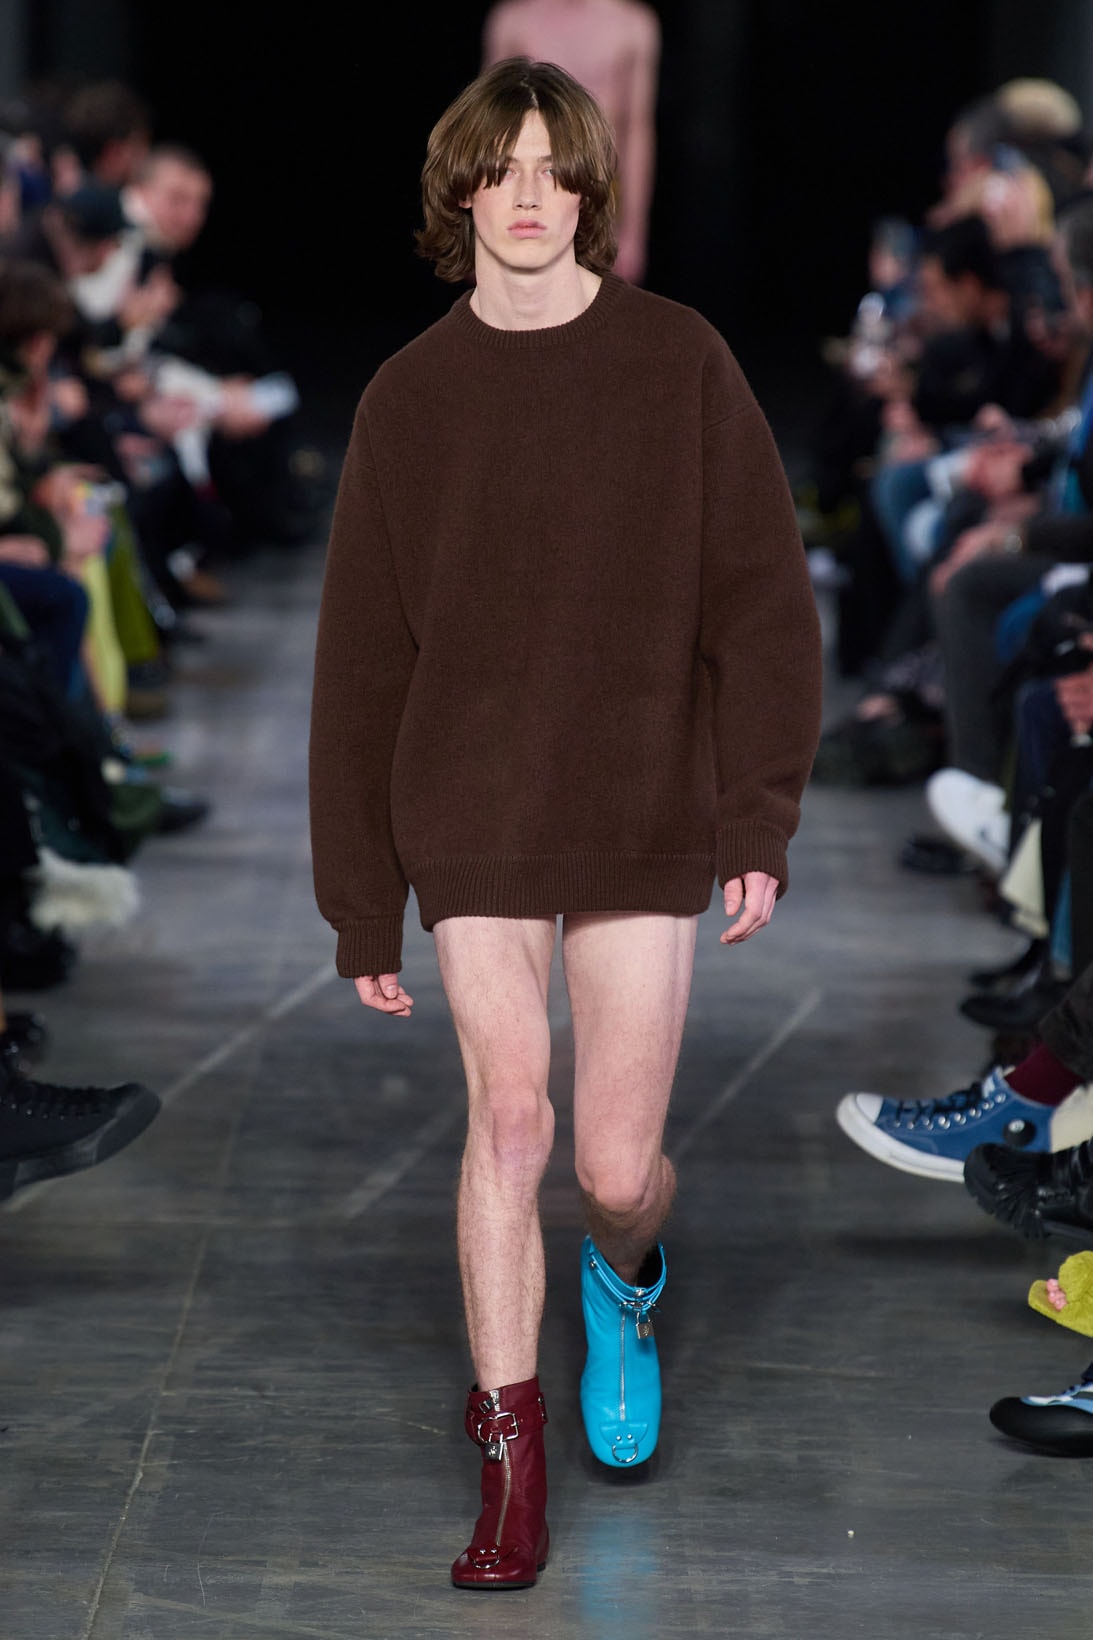 JW Anderson Pre-Fall Winter Milan Fashion Week Men's Runway Frog Wellipets Boots Images